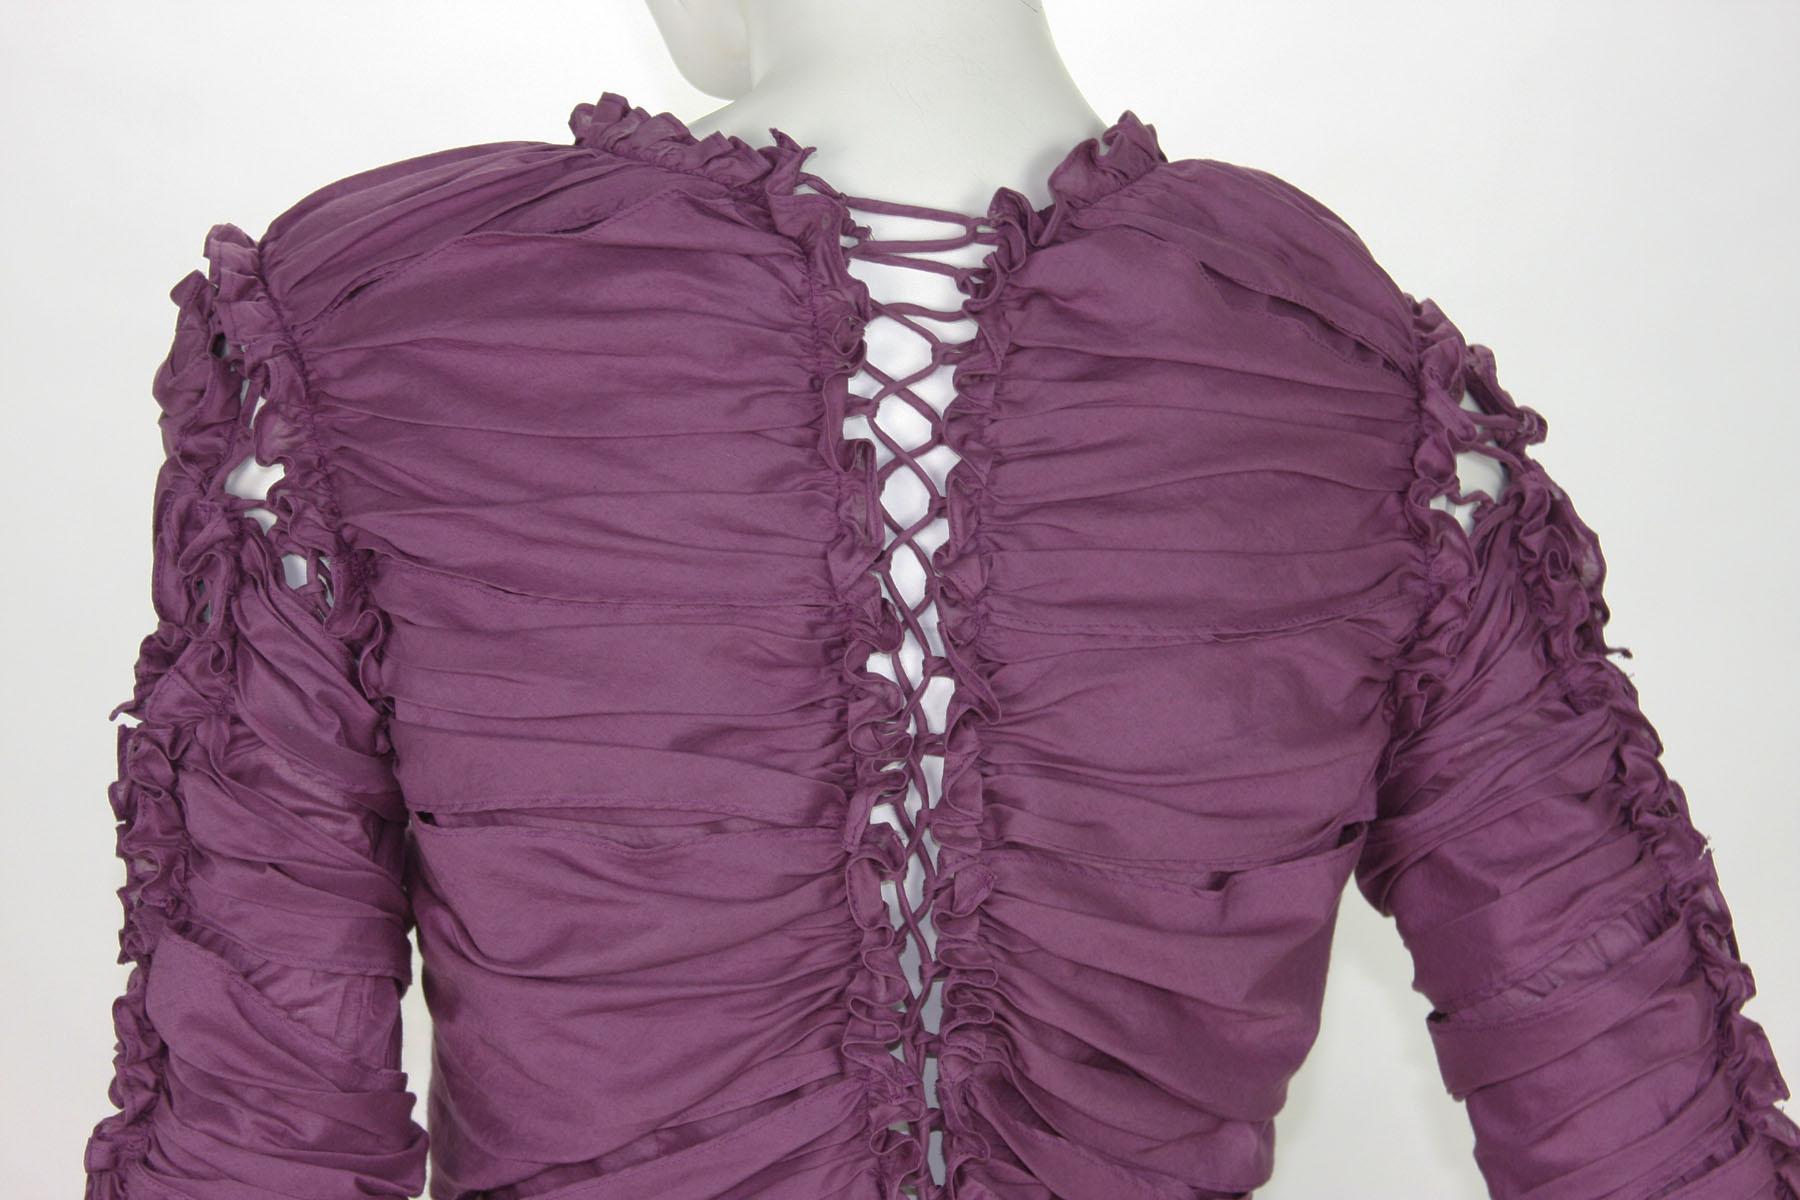 TOM FORD for YVES SAINT LAURENT F/W 2001 Plum Lace-Up Top Blouse Fr 40 - US 6/8 4